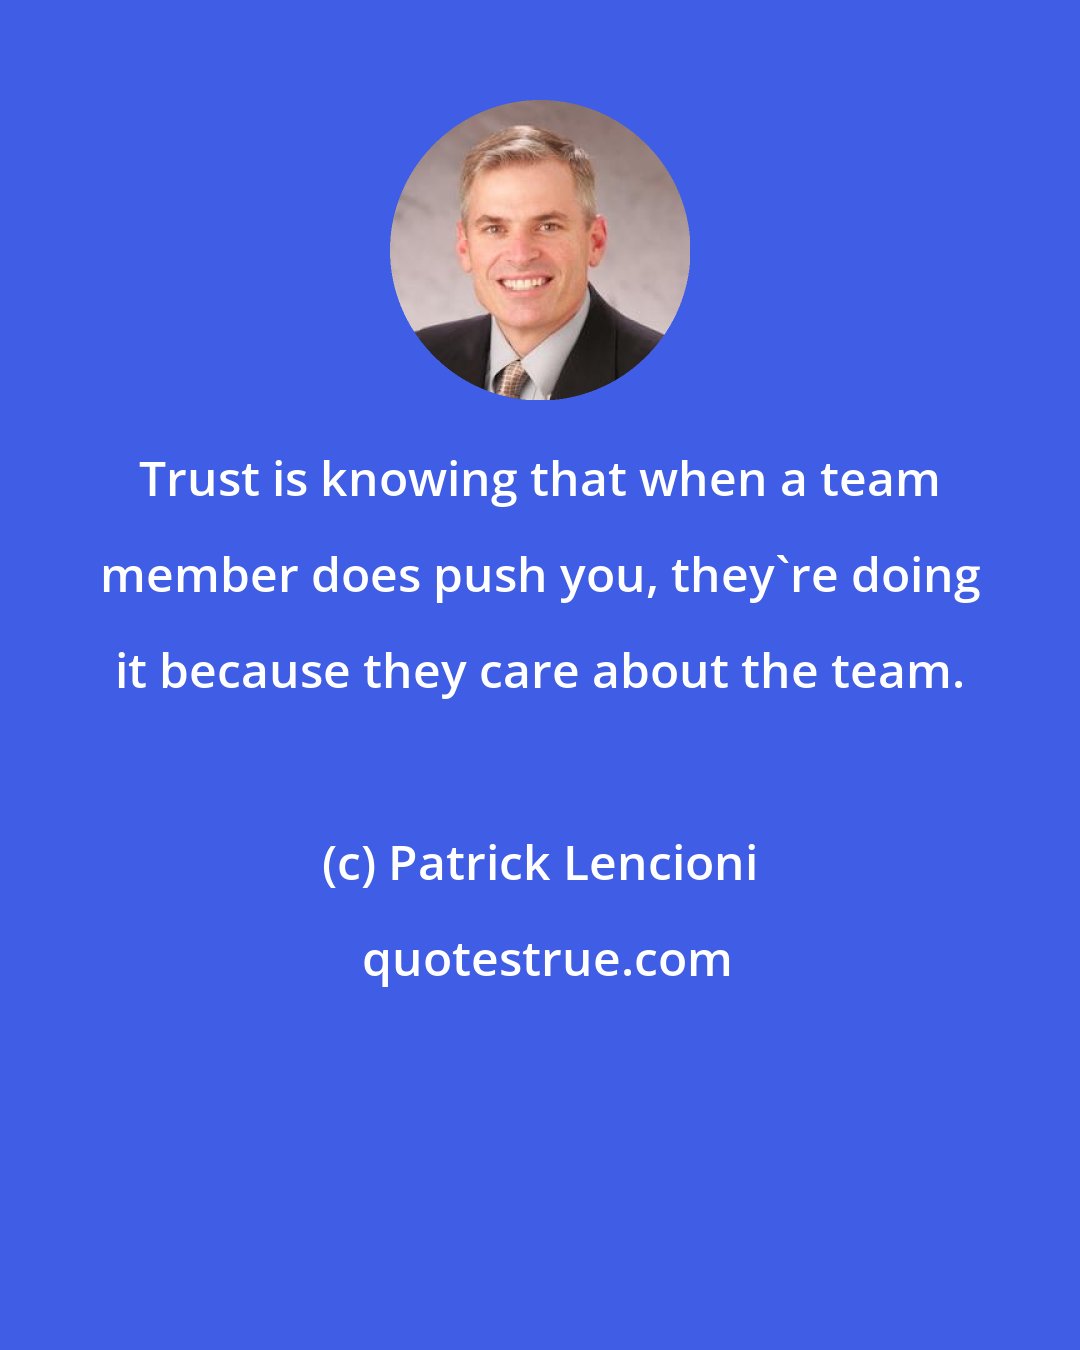 Patrick Lencioni: Trust is knowing that when a team member does push you, they're doing it because they care about the team.